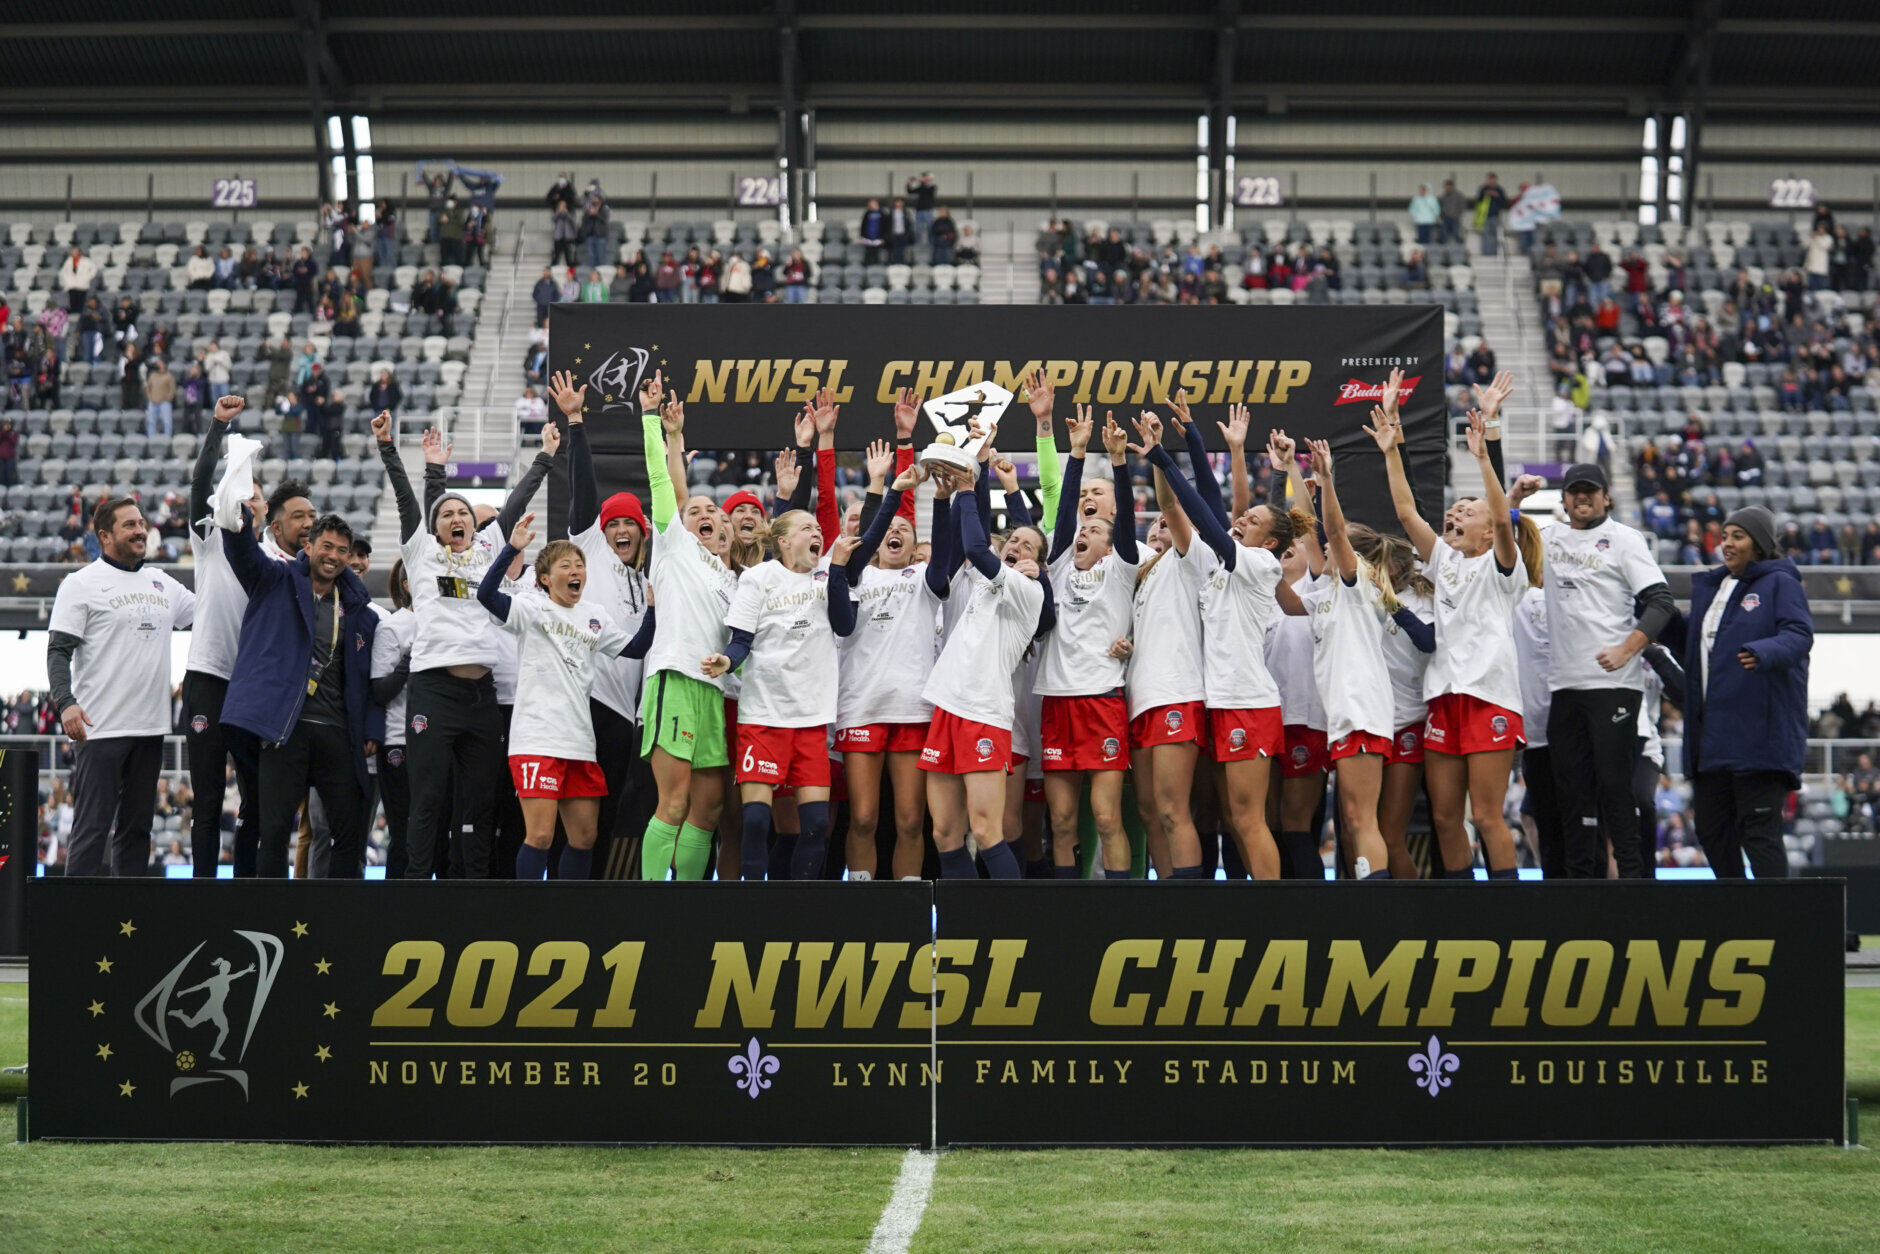 <h3>Spirit’s tumultuous season ends with a championship</h3>
<p>A year filled with high expectations for the Washington Spirit was almost derailed midway through its 2021 campaign.</p>
<p>Spirit head coach <a href="https://wtop.com/local-sports/2021/09/washington-spirit-head-coach-fired-banned-from-soccer-league/" target="_blank" rel="noopener">Richie Burke was banned following an investigation into abusive behavior toward players.</a> Meanwhile, reports of mismanagement from ownership, including turning a blind eye toward Burke&#8217;s actions, drove a <a href="https://wtop.com/dc/2021/10/washington-spirit-co-owner-steve-baldwin-resigns/" target="_blank" rel="noopener">fan and player protest calling for the sale of the team</a>. Lastly, the team was forced to forfeit two matches after it violated the league&#8217;s COVID-19 protocols.</p>
<p>Despite all the controversies, <a href="https://wtop.com/soccer/2021/11/through-adversity-washington-spirit-looks-to-make-nwsl-championship-run/" target="_blank" rel="noopener">the players came together to let their play do the talking</a>. Under interim coach Kris Ward, the Spirit went on an unprovable run of eight victories in their final nine games to capture <a href="https://wtop.com/soccer/2021/11/spirit-wins-nwsl-title-2-1-in-extra-time-over-red-stars/" target="_blank" rel="noopener">the club’s first-ever NWSL Championship</a>.</p>
<p>Heading to 2022, the Spirit&#8217;s depth and talent could have them poised to win it all again. With the league’s top goal scorer (Ashley Hatch), Goalkeeper of the year (Aubrey Bledsoe), and Rookie of the Year (Trinity Rodman) all returning, Washington could become a force to be reckoned with for years to come.</p>
<p><em>— José Umaña</em></p>
